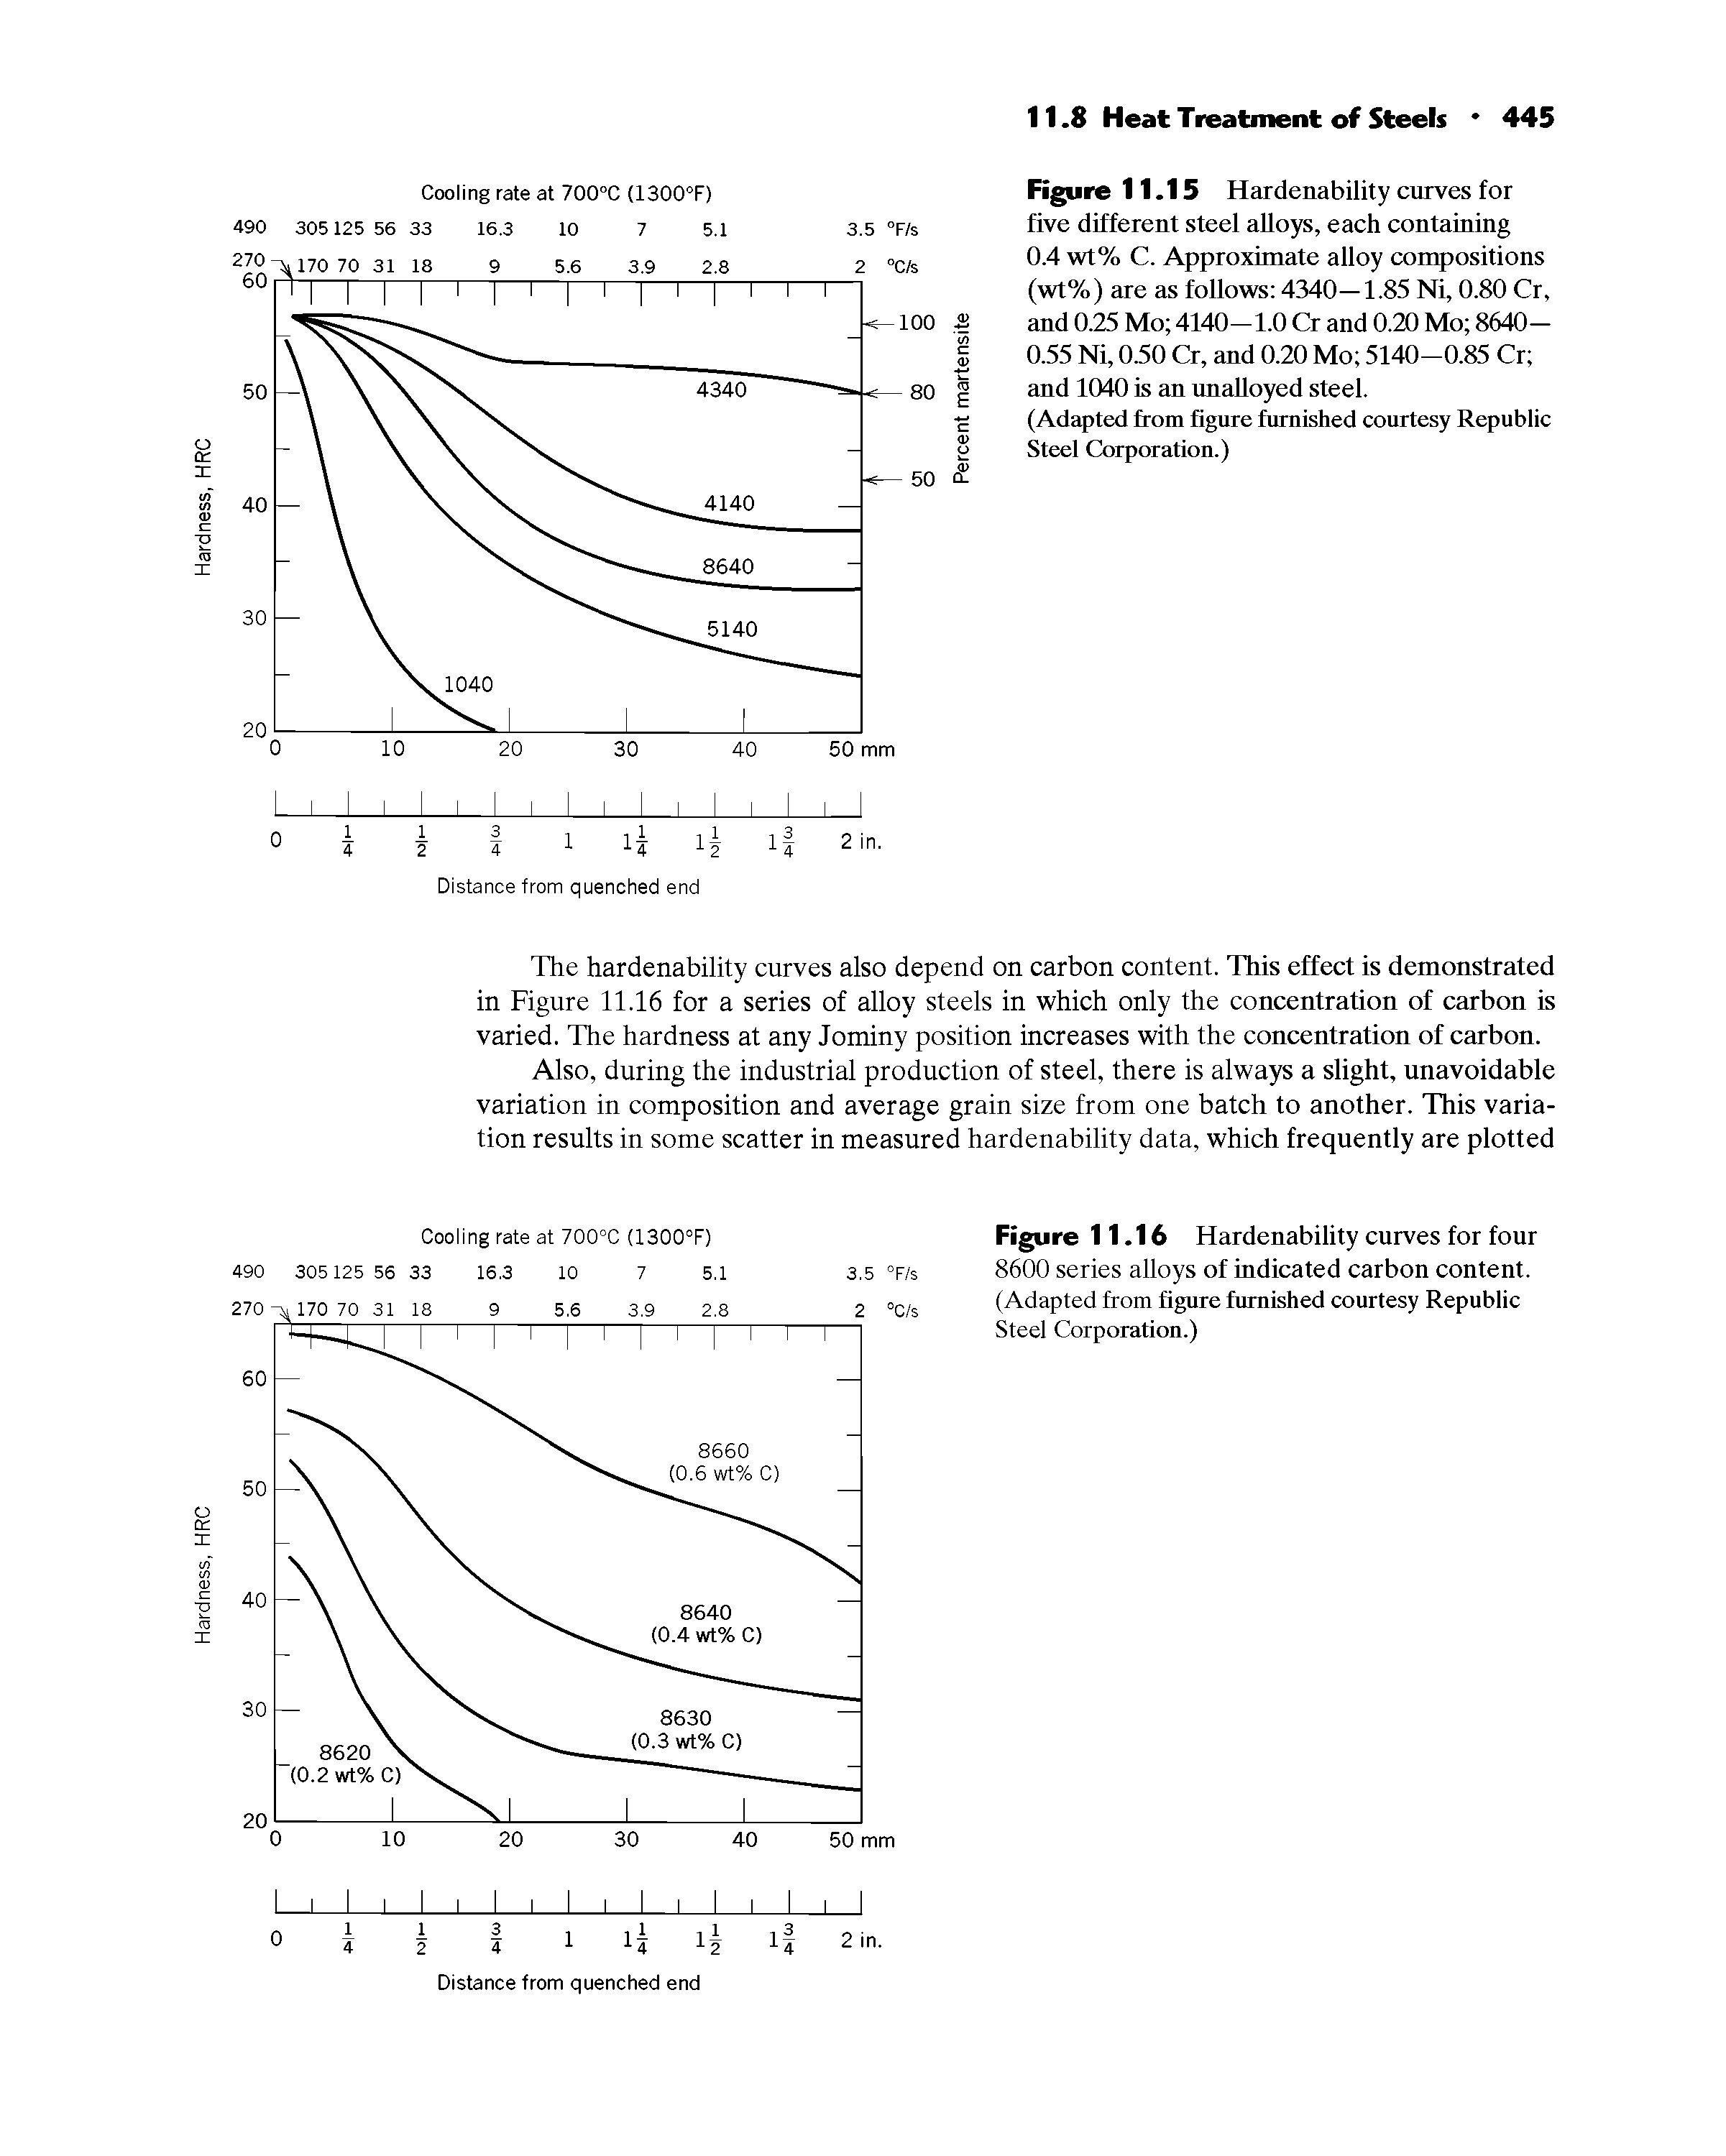 Figure 11.16 Hardenability curves for four 8600 series alloys of indicated carbon content. (Adapted from figure furnished courtesy Republic Steel Corporation.)...